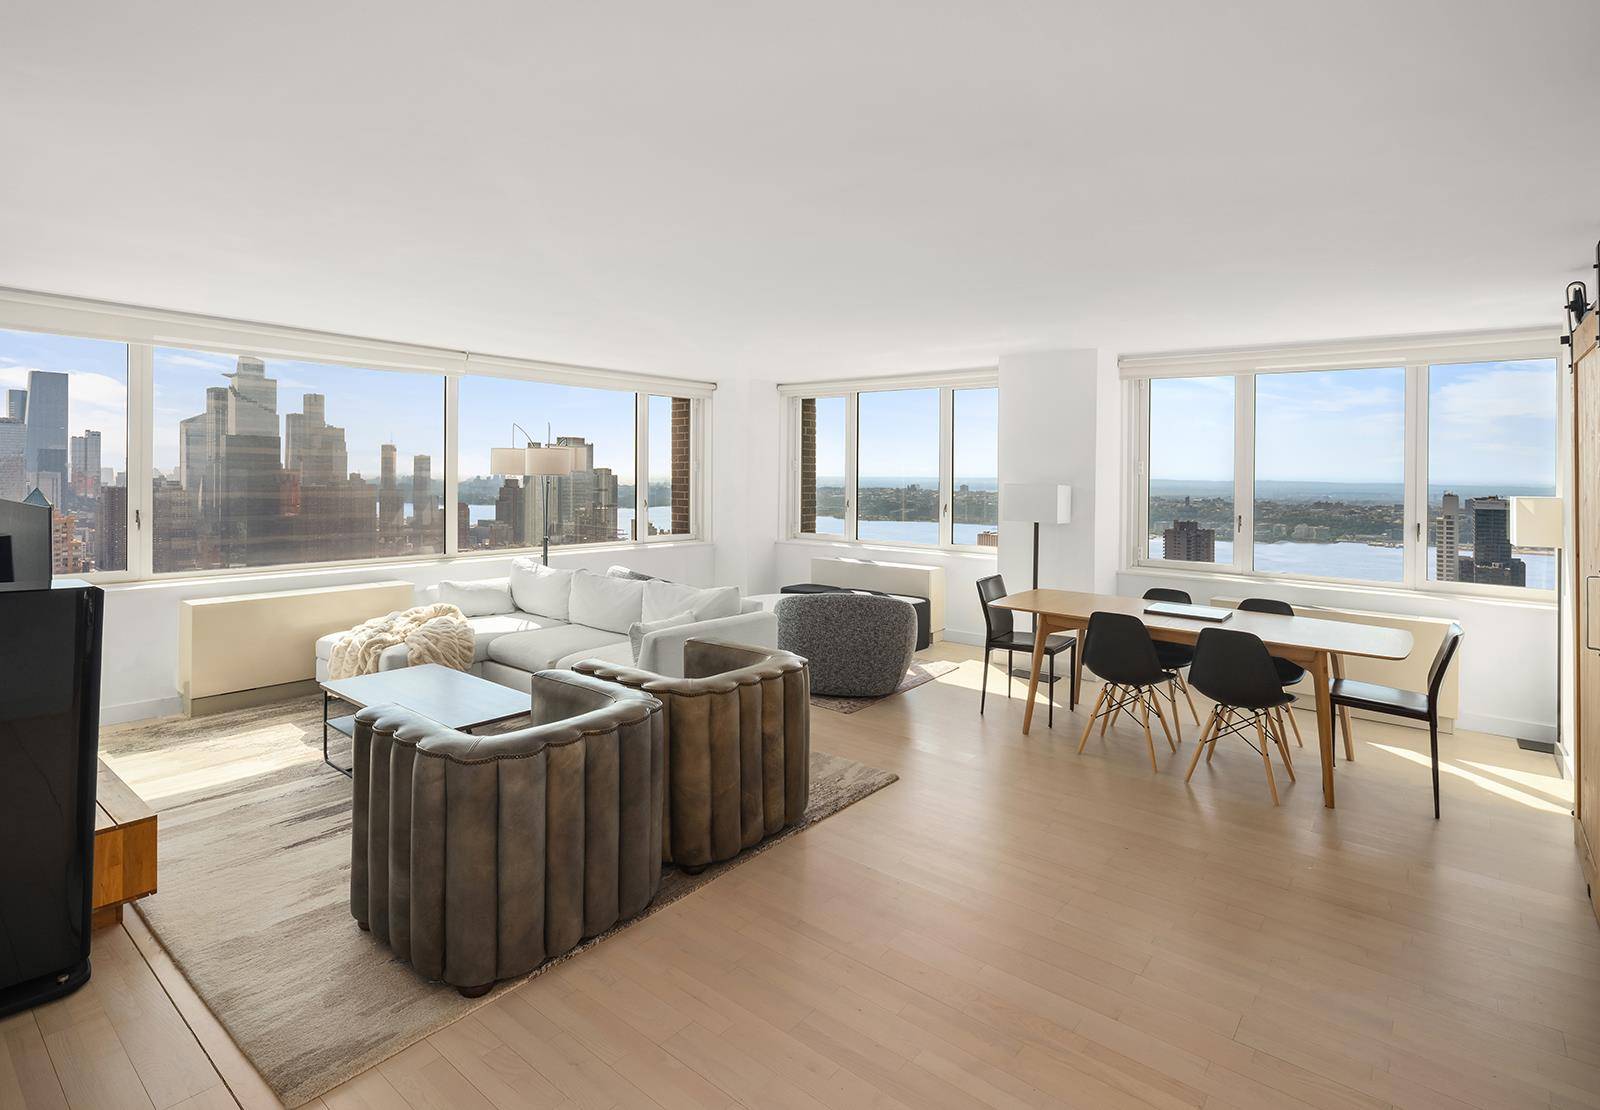 Just 2 blocks from Central Park and Columbus Circle, The Sheffield at 322 West 57th Street, is located in the much sought after West 57th street uber luxury residential corridor, ...